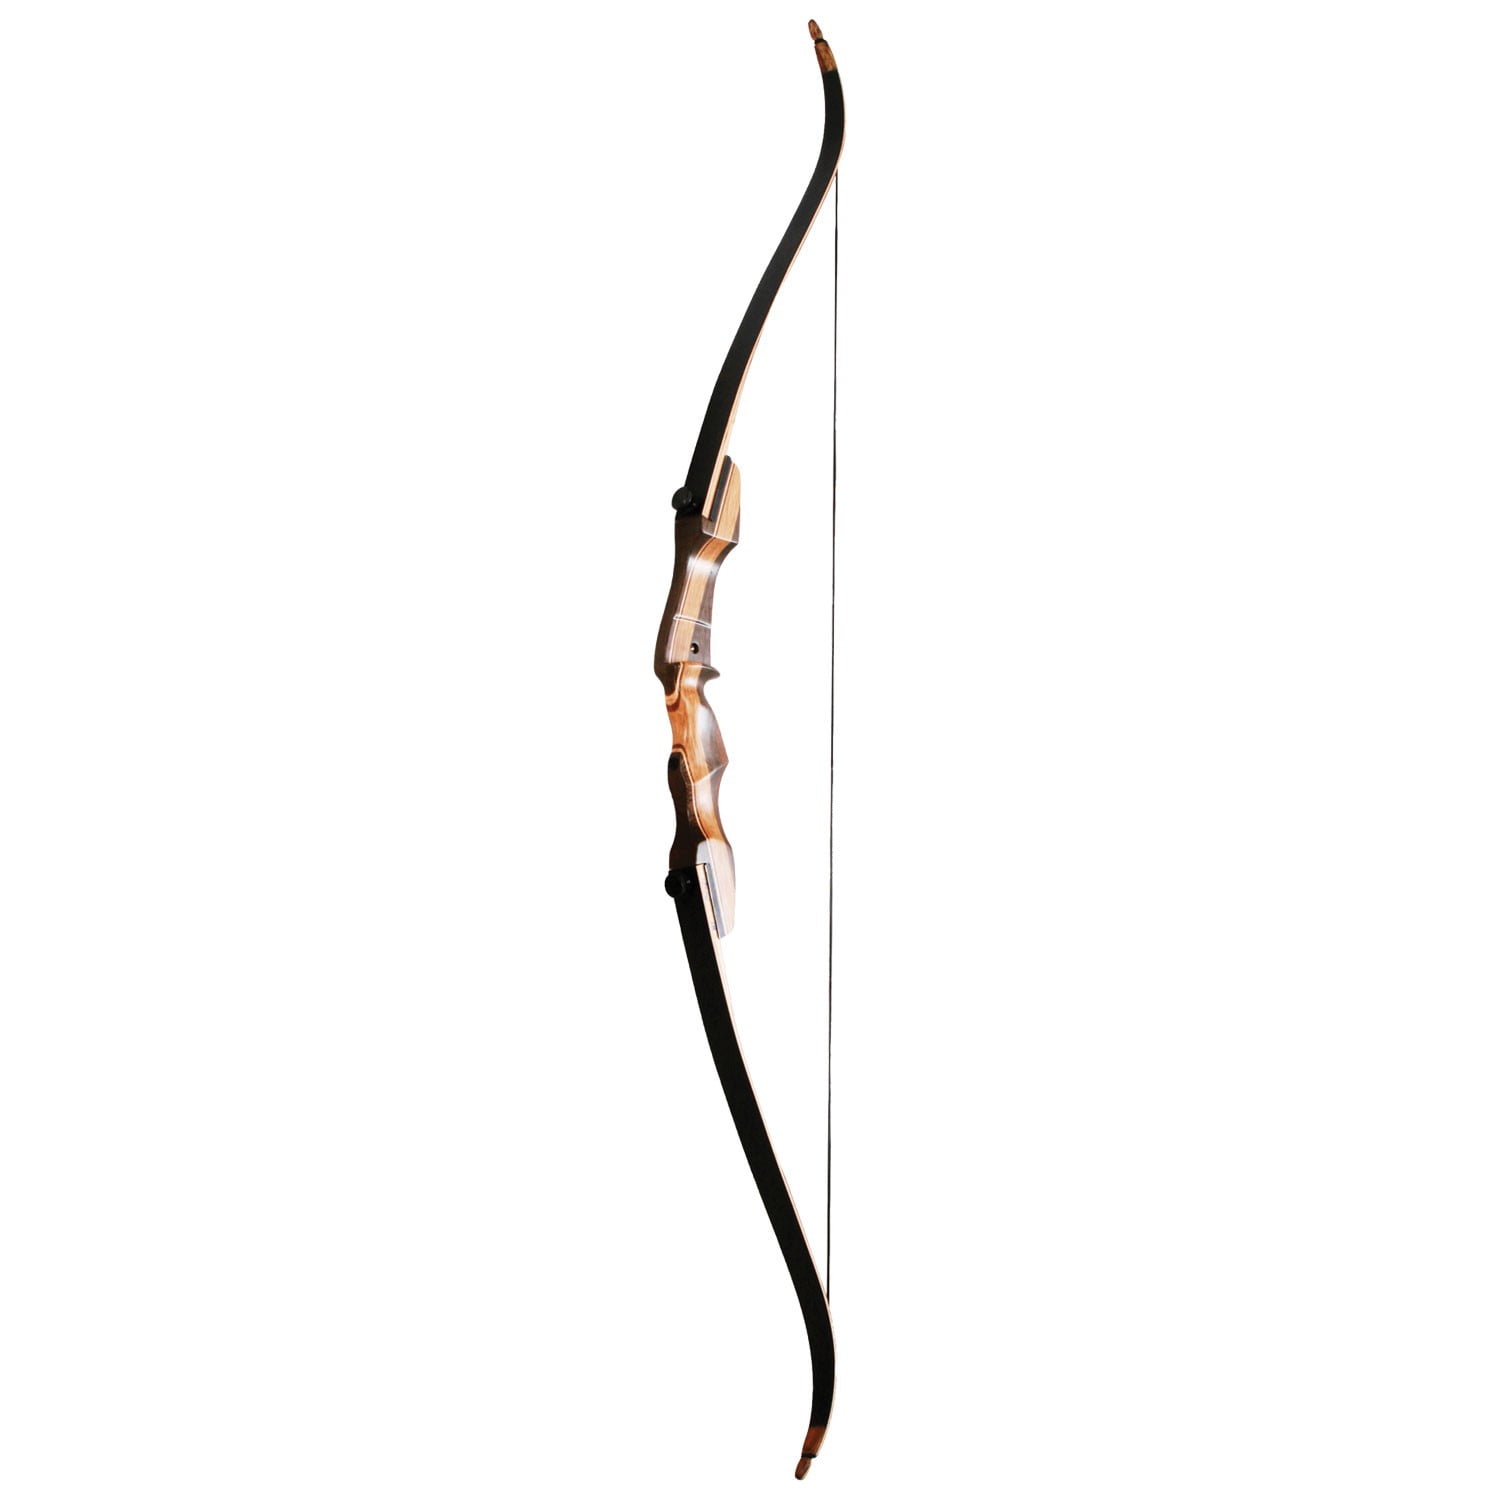 New PSE Stalker Take Down Recurve Bow 40# Right Hand AMO Length 60"" 